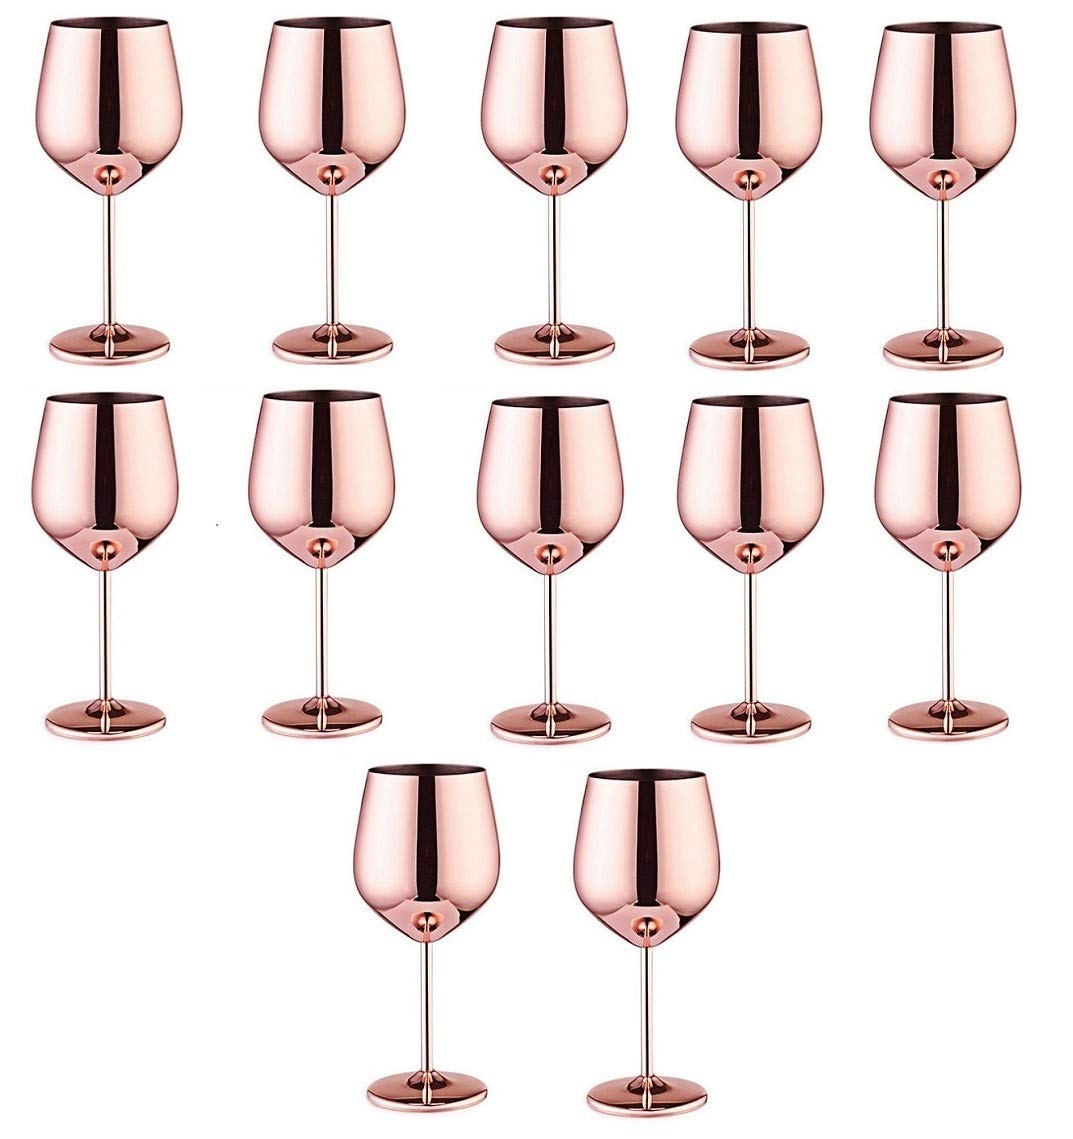 NJ Stainless Steel Stemmed Wine Glasses, Shatter Proof Copper Coated Unbreakable Wine Glass Goblets, Gift for Men and Women, Party Supplies - 350 ml: Set of 12 Pcs